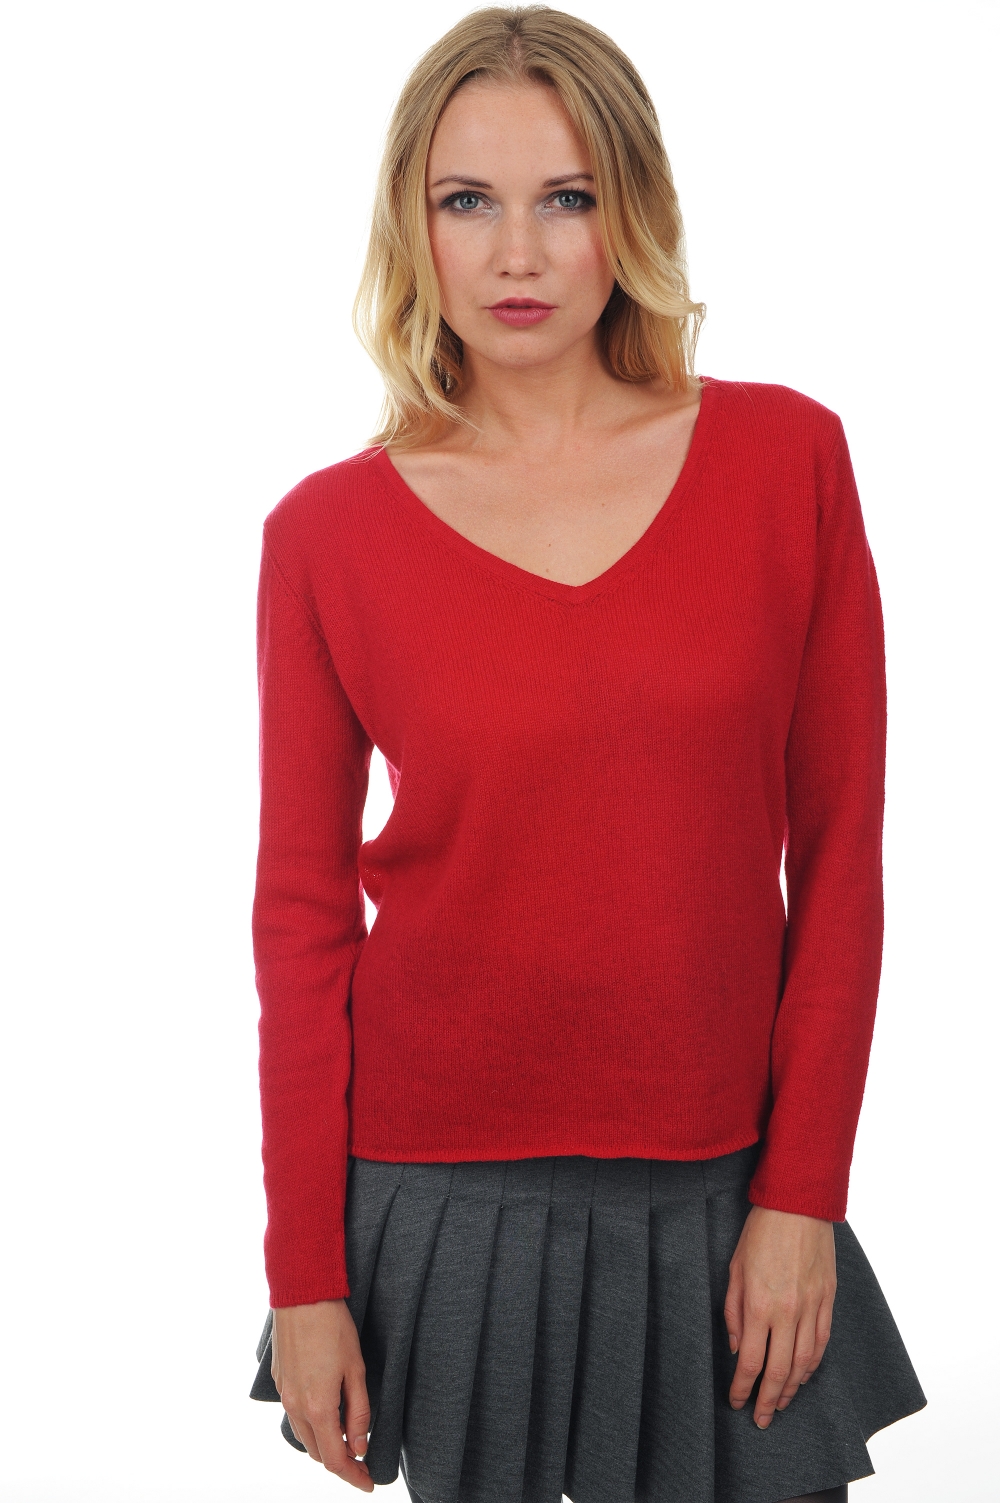 Cashmere ladies basic sweaters at low prices flavie blood red xs